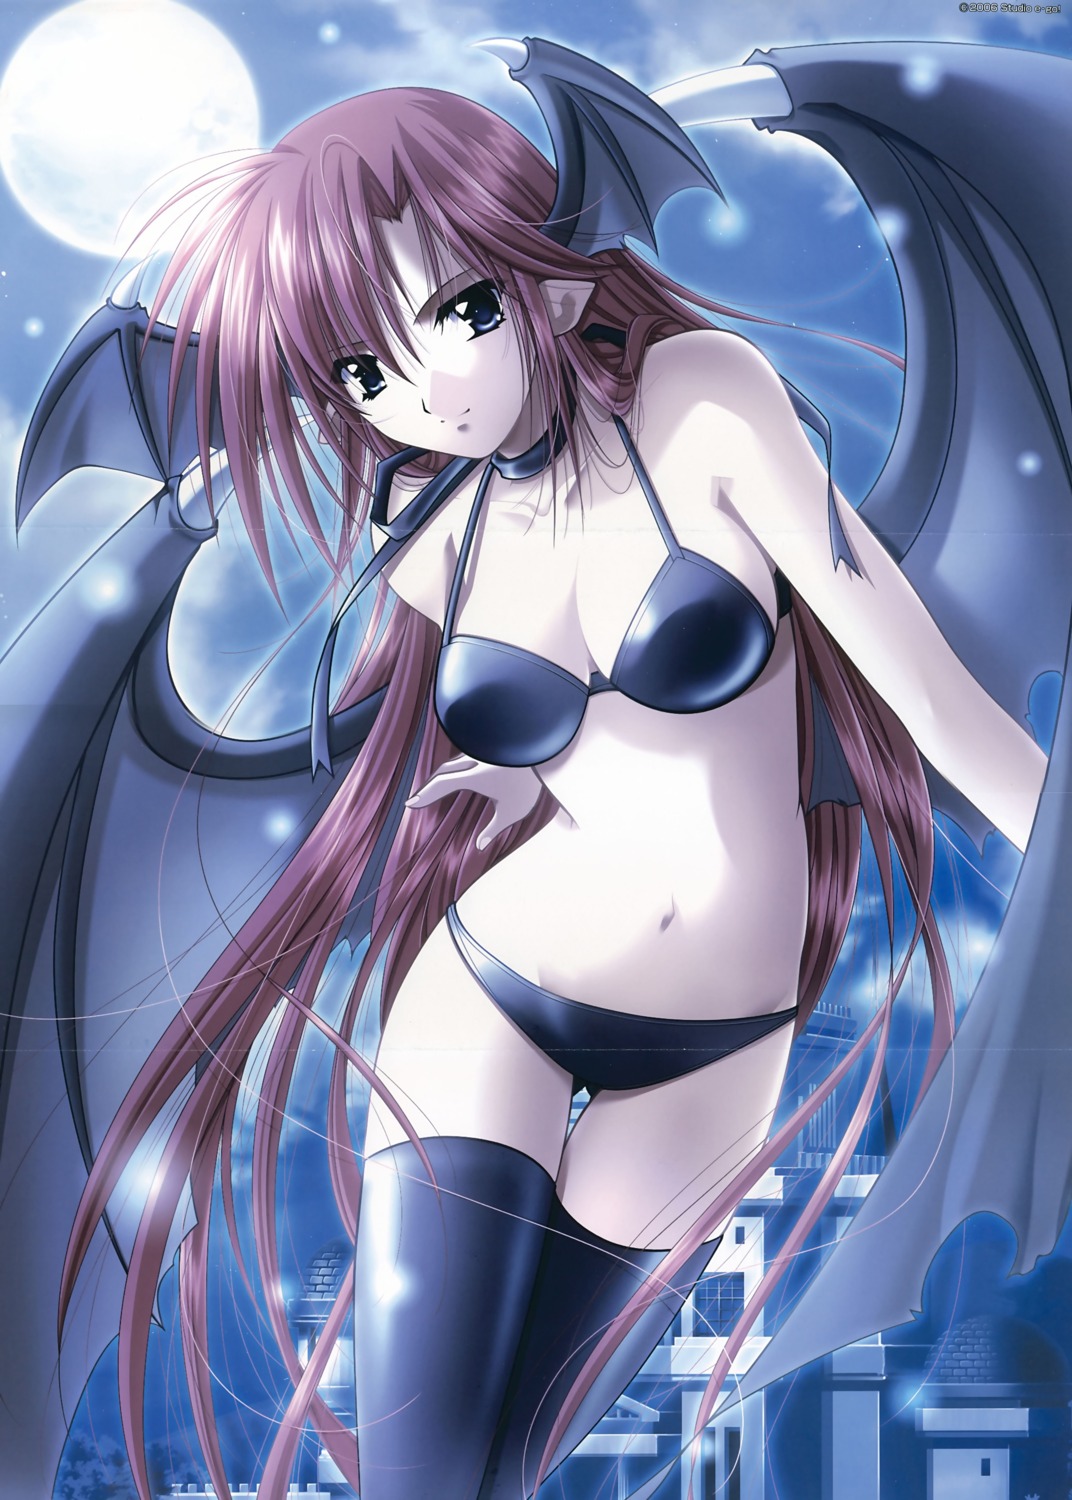 bikini cleavage crease devil kathrine_siphon men_at_work men_at_work_4 pointy_ears studio_e.go! swimsuits thighhighs wings yamamoto_kazue